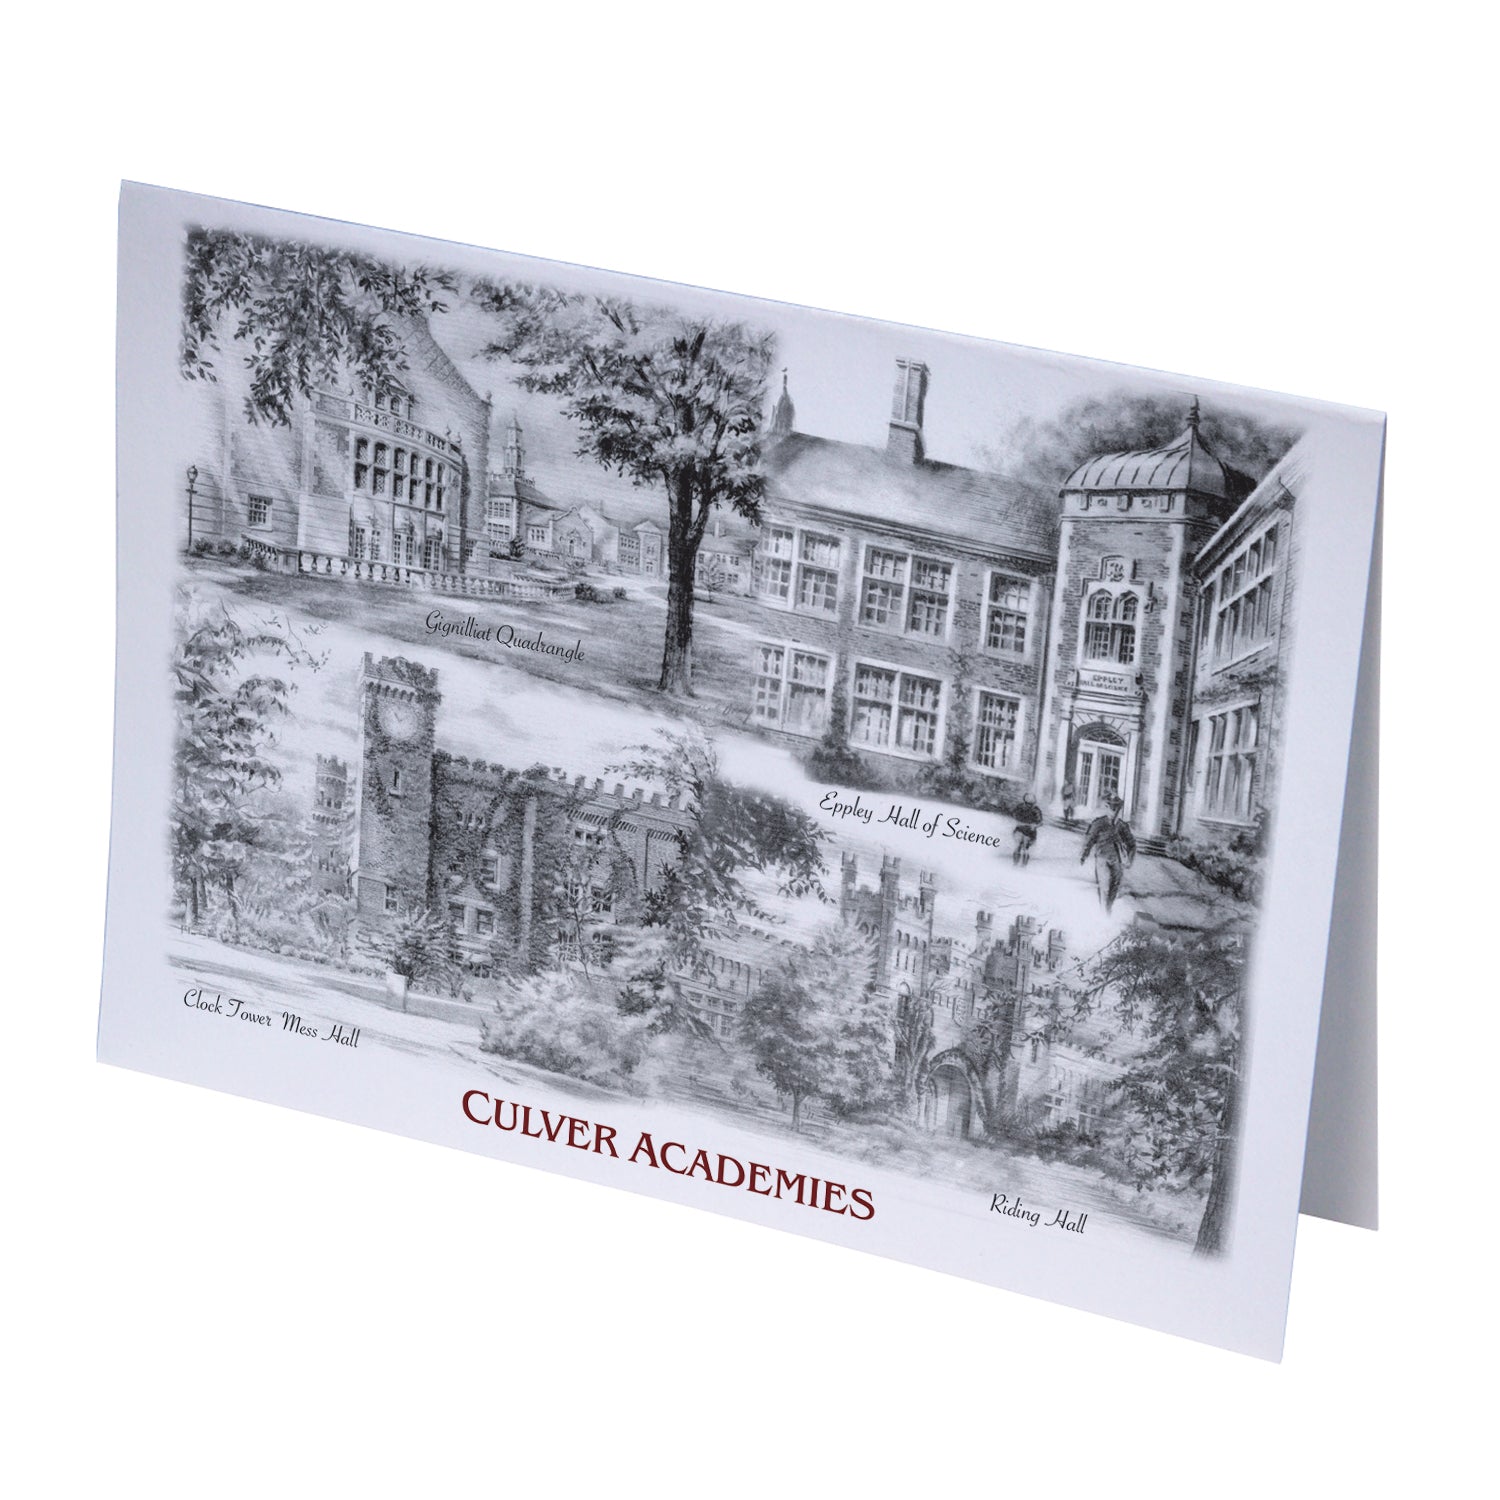 Culver Buildings Note Cards featuring Historical Sketches - 10 pack